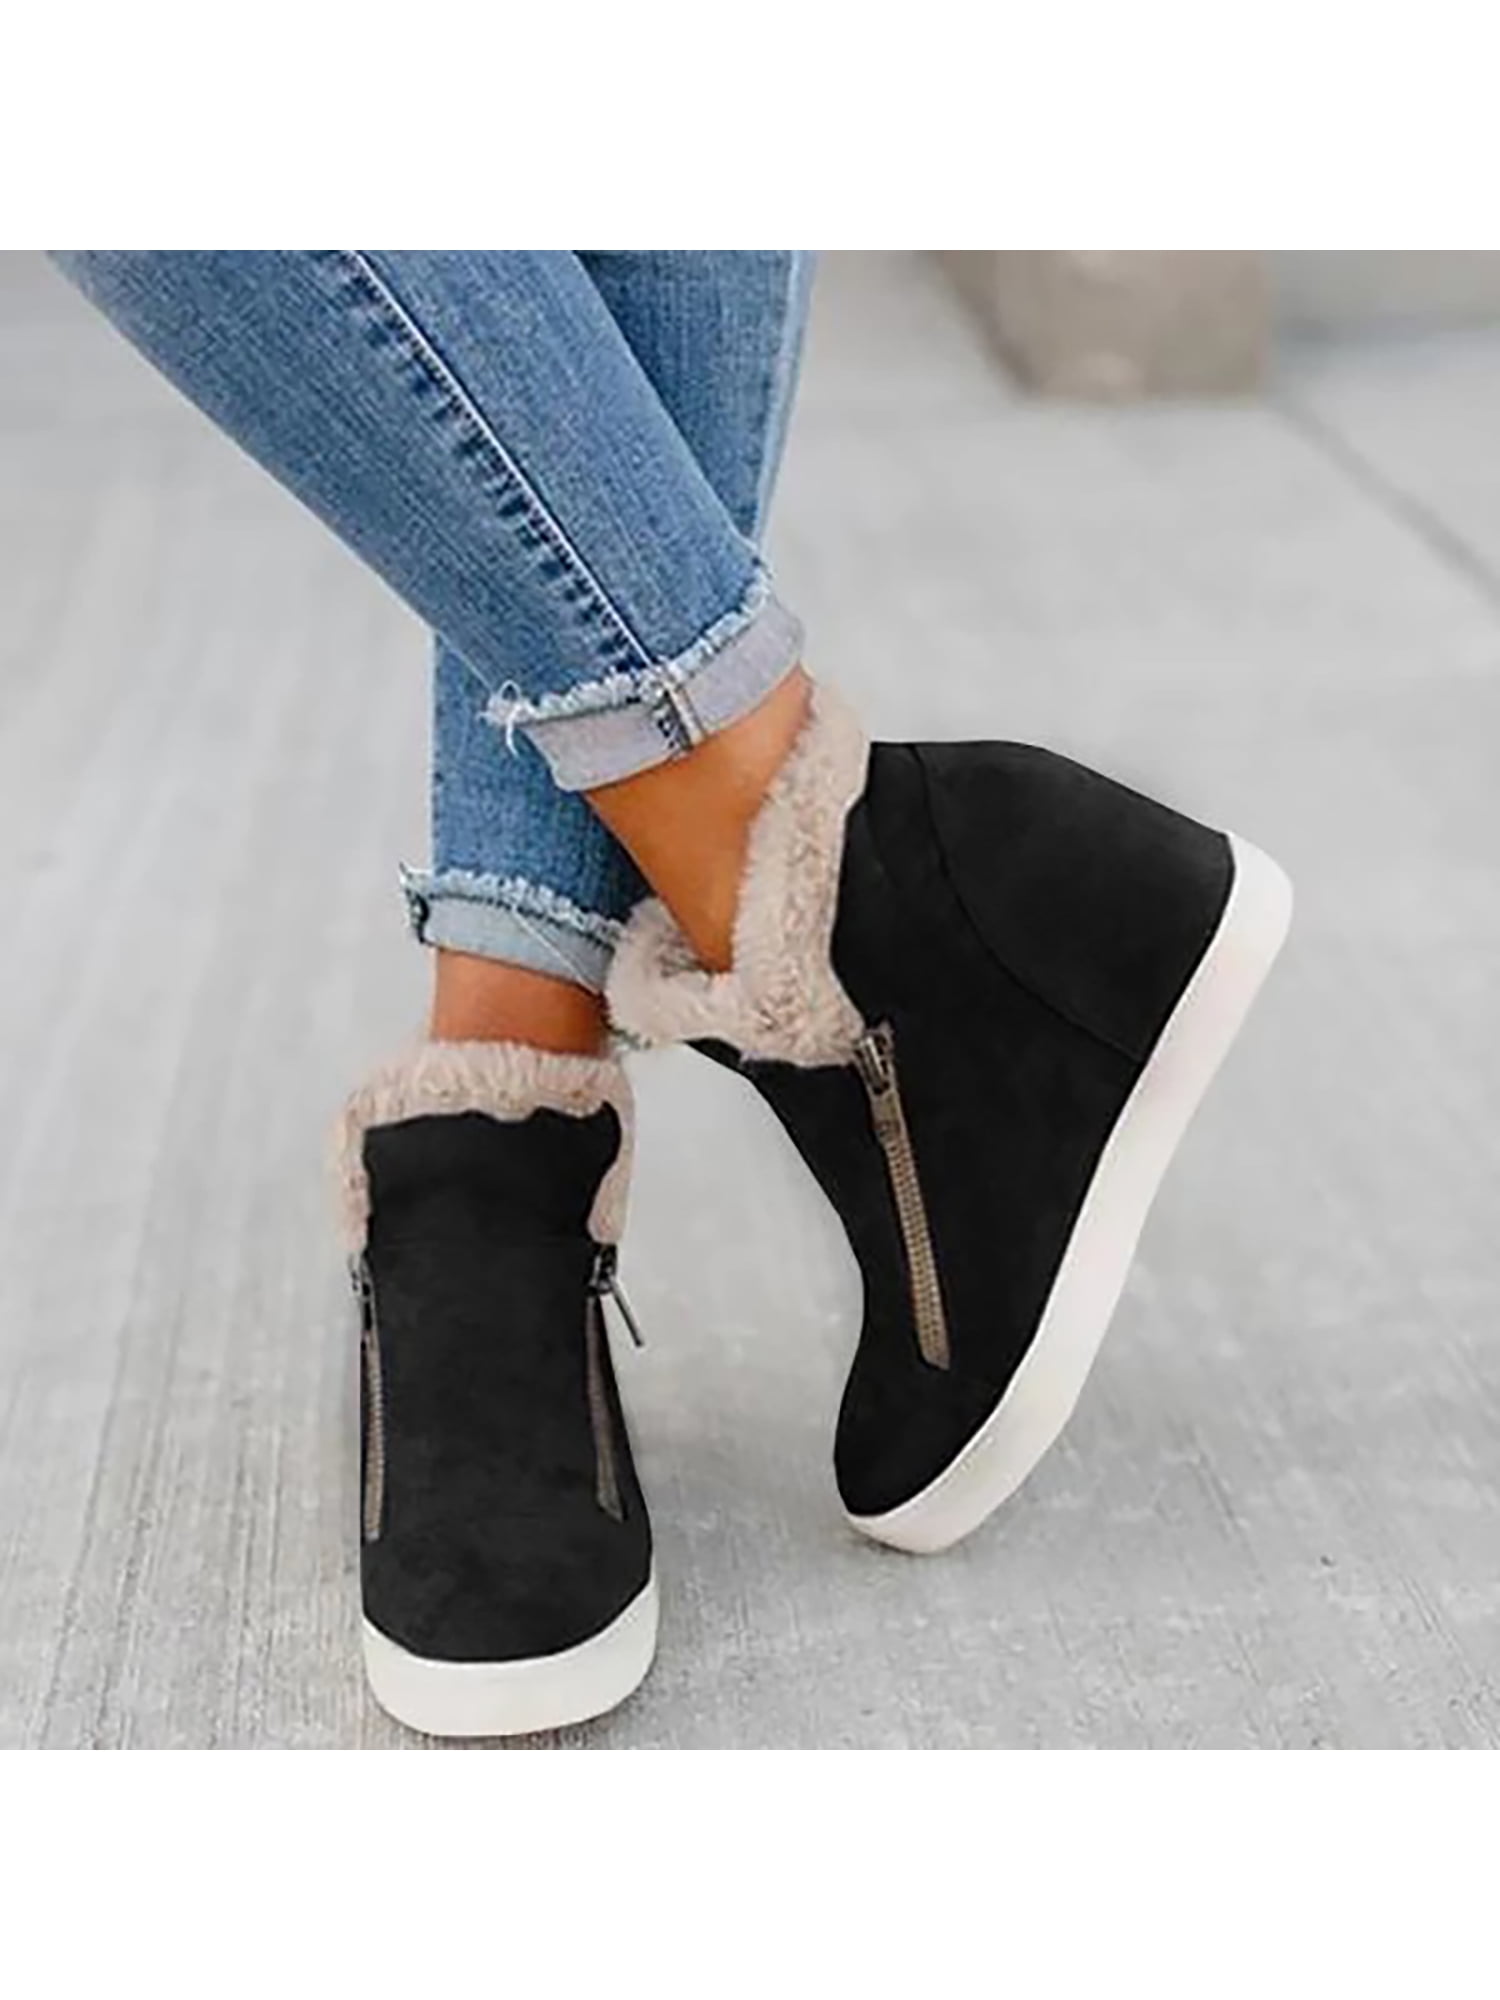 New Womens Winter Warm Wedge hidden Faux Suede Fur Lining Calf Boots Shoes Snow